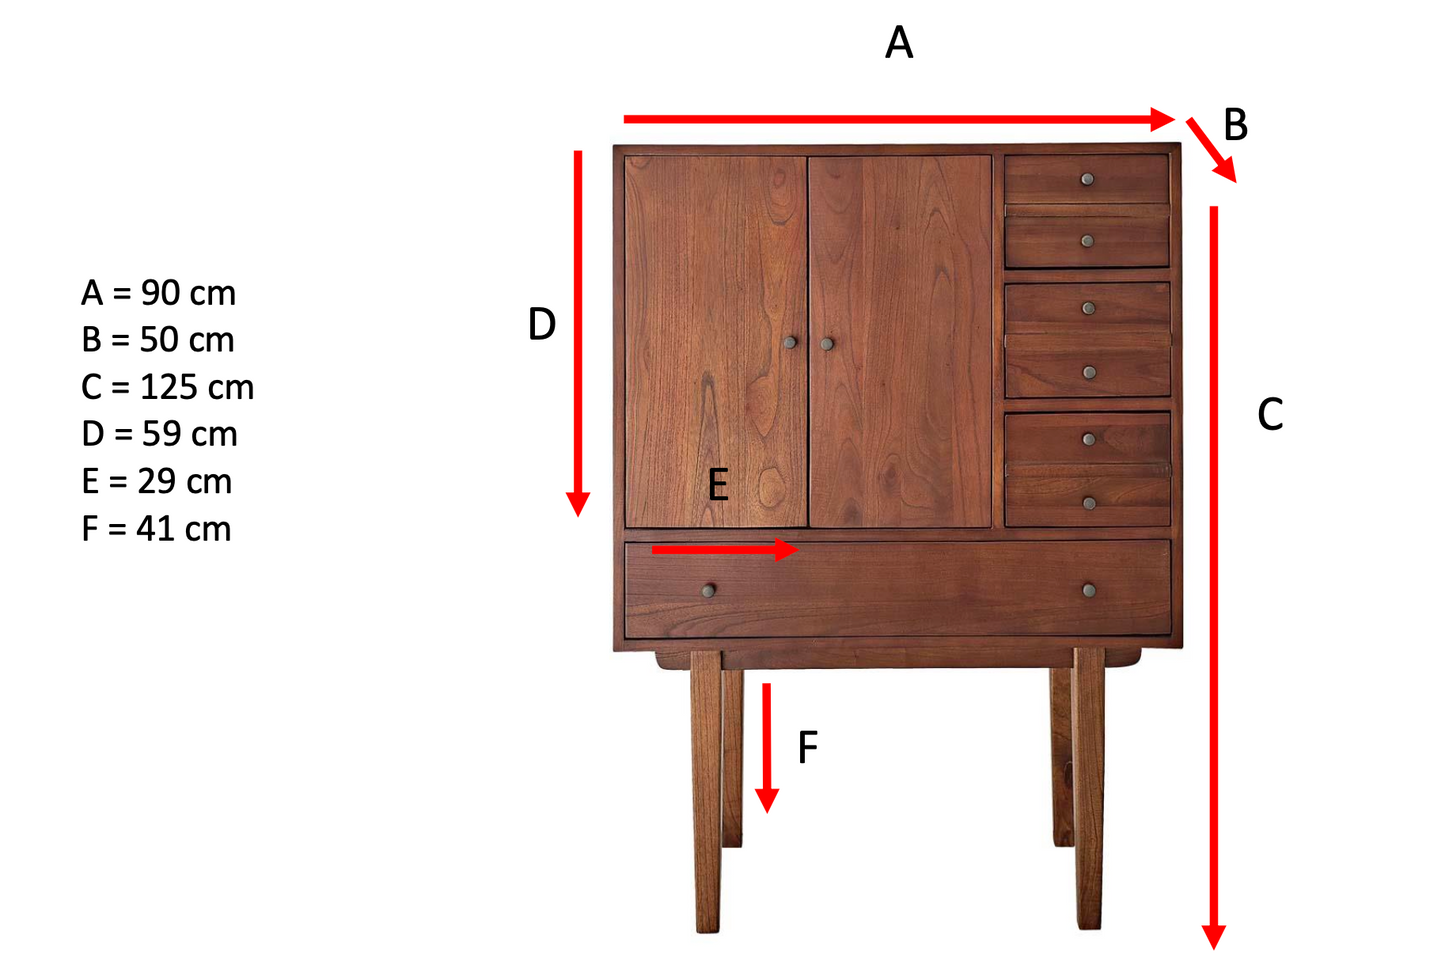 Adams Chest Of Drawers